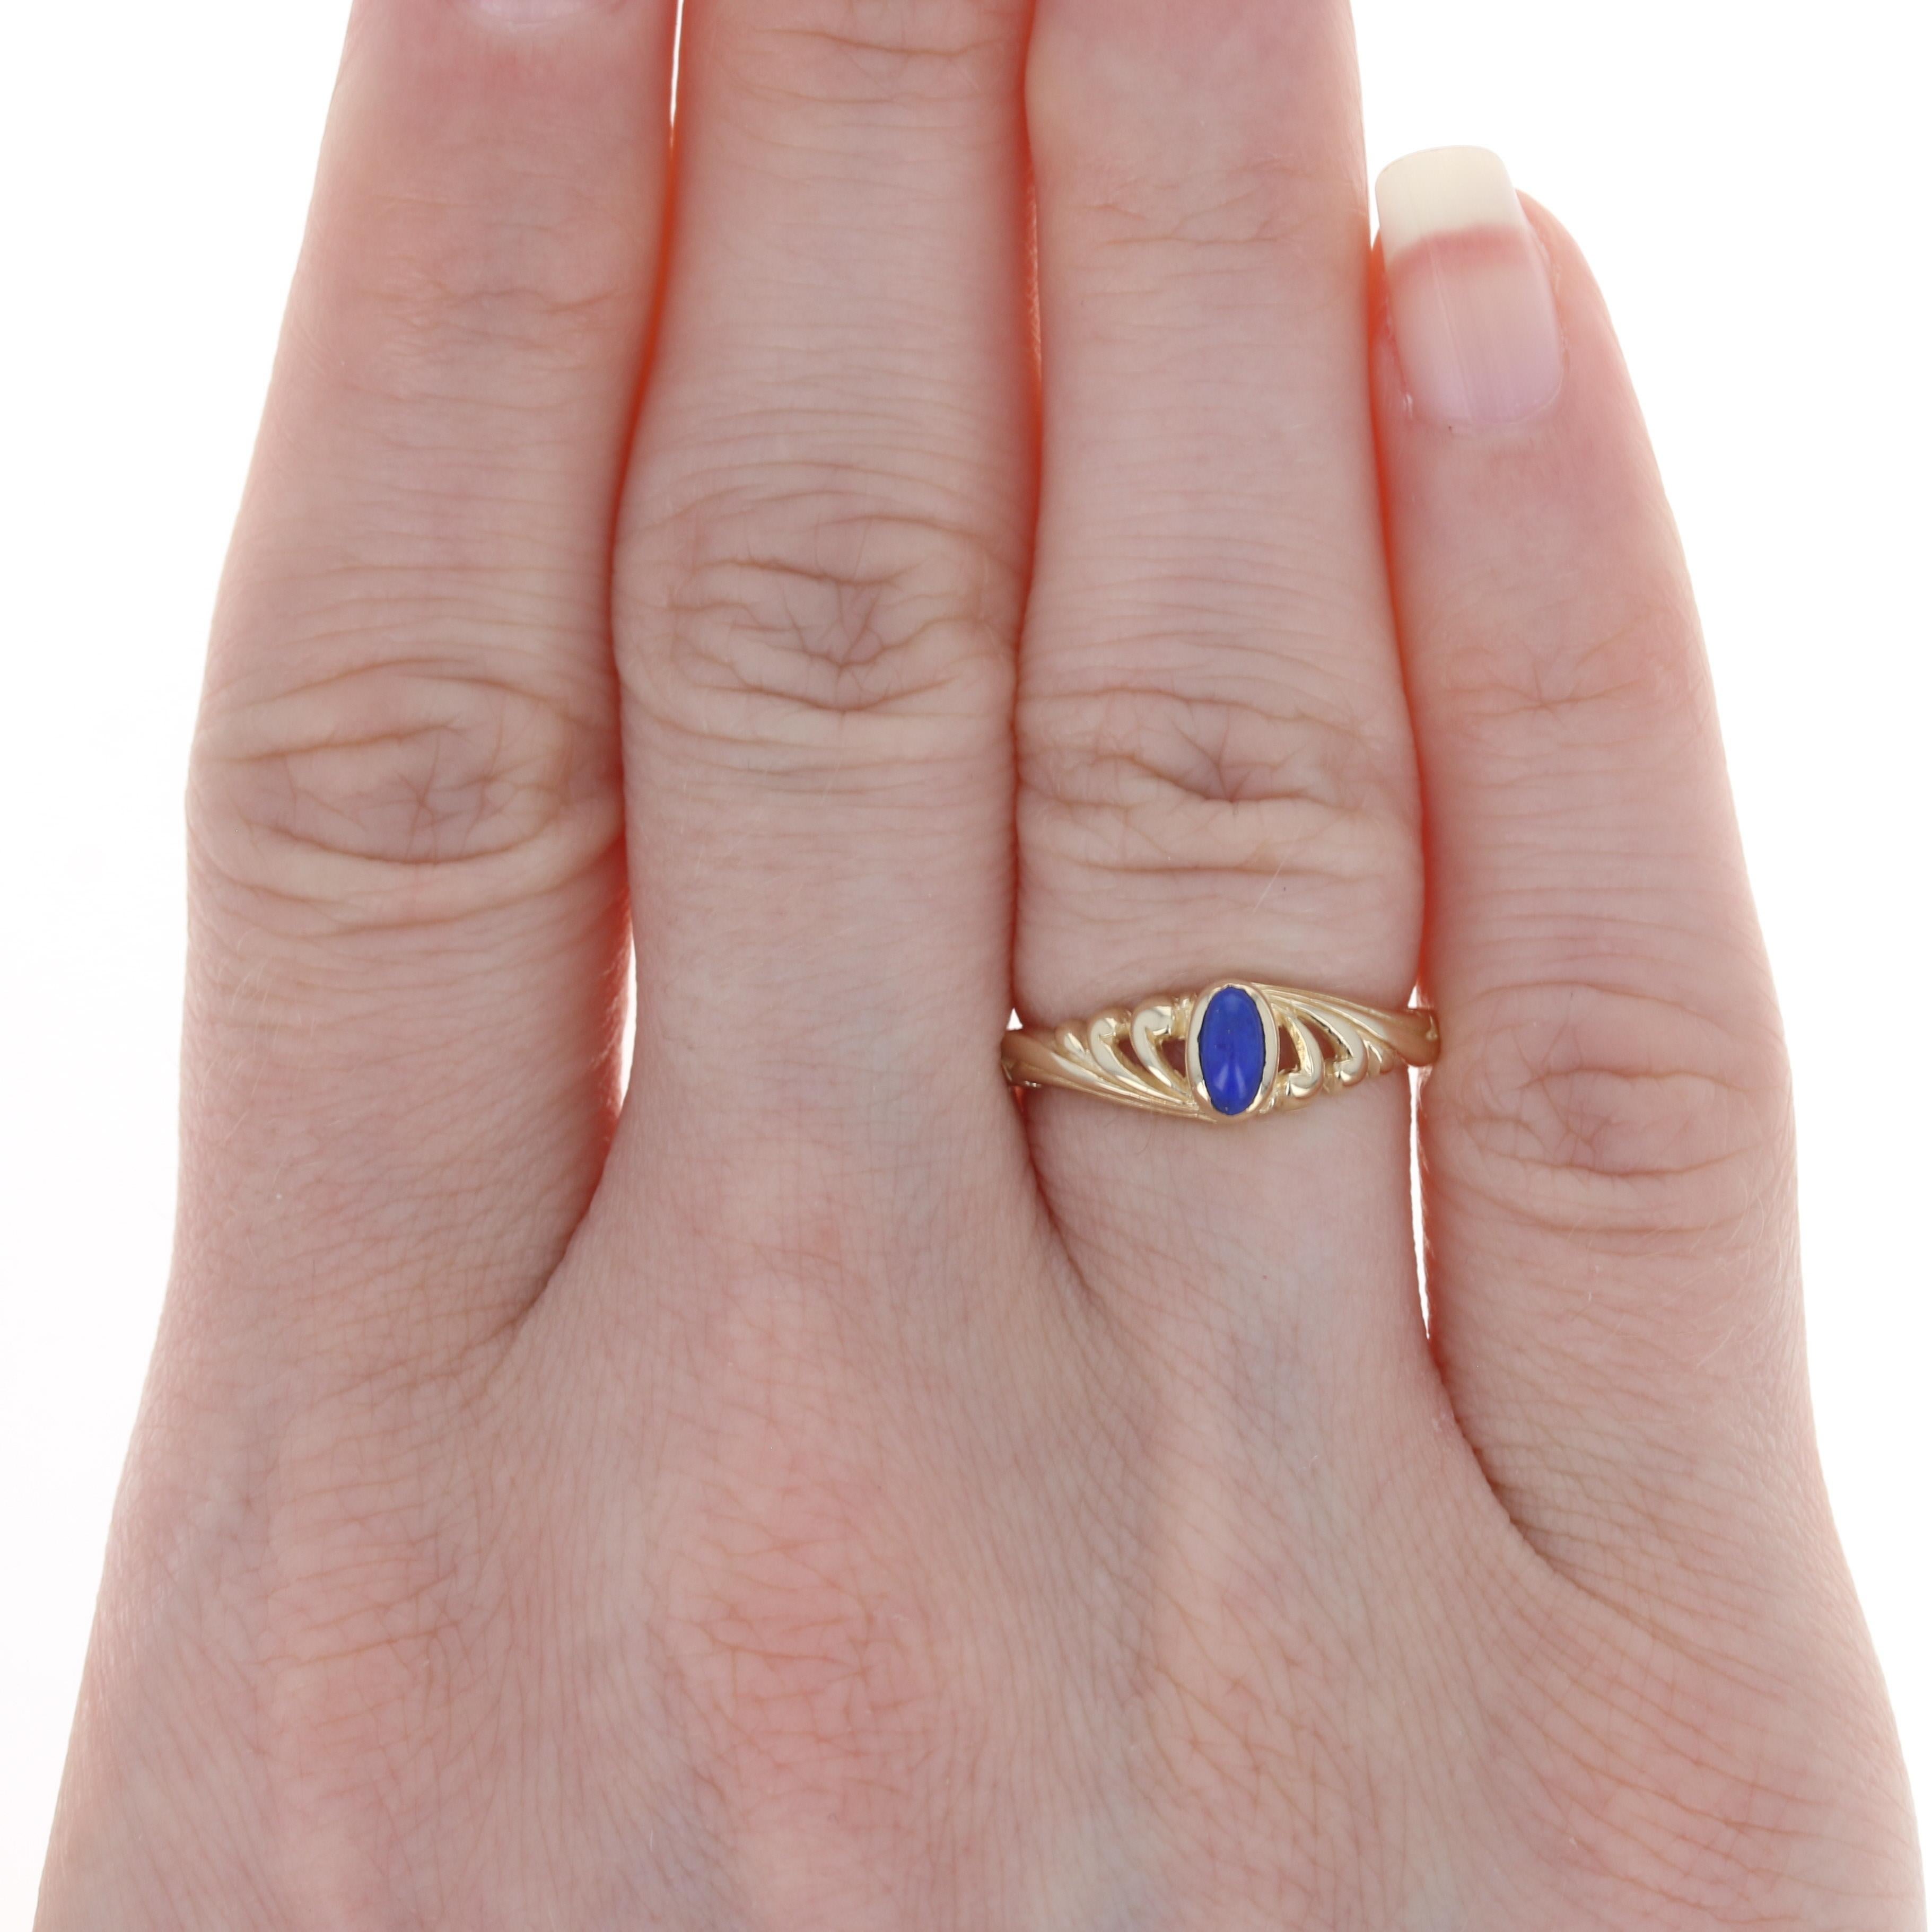 Size: 5 1/4
 Sizing Fee: Down 2 sizes for $20 or up 2 sizes for $25
 
 Metal Content: 14k Yellow Gold
 
 Stone Information: 
 Genuine Lapis Lazuli
 Color: Blue
 
 Style: Solitaire
 Features: Open Cut Detailing
 
 Face Height (north to south): 1/4